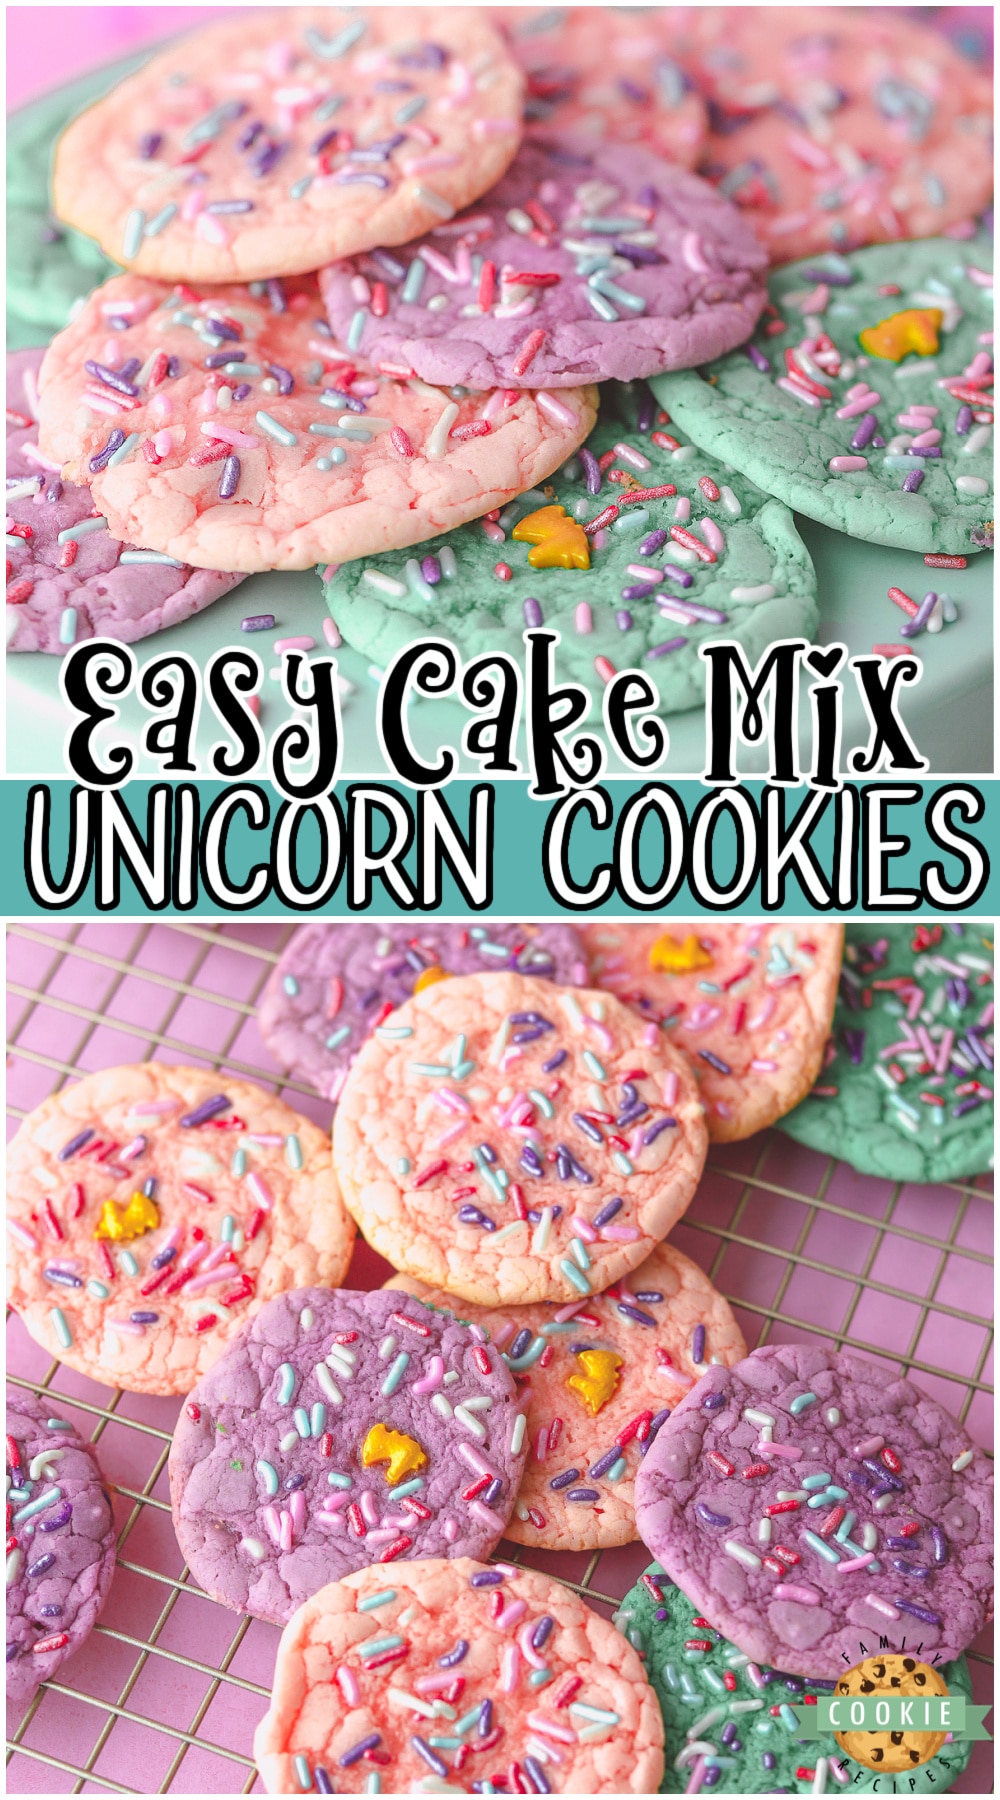 Easy Unicorn Cookies made with cake mix, eggs, oil & sprinkles! Fun, colorful cake mix cookie recipe with a unicorn inspired theme perfect for birthday parties!